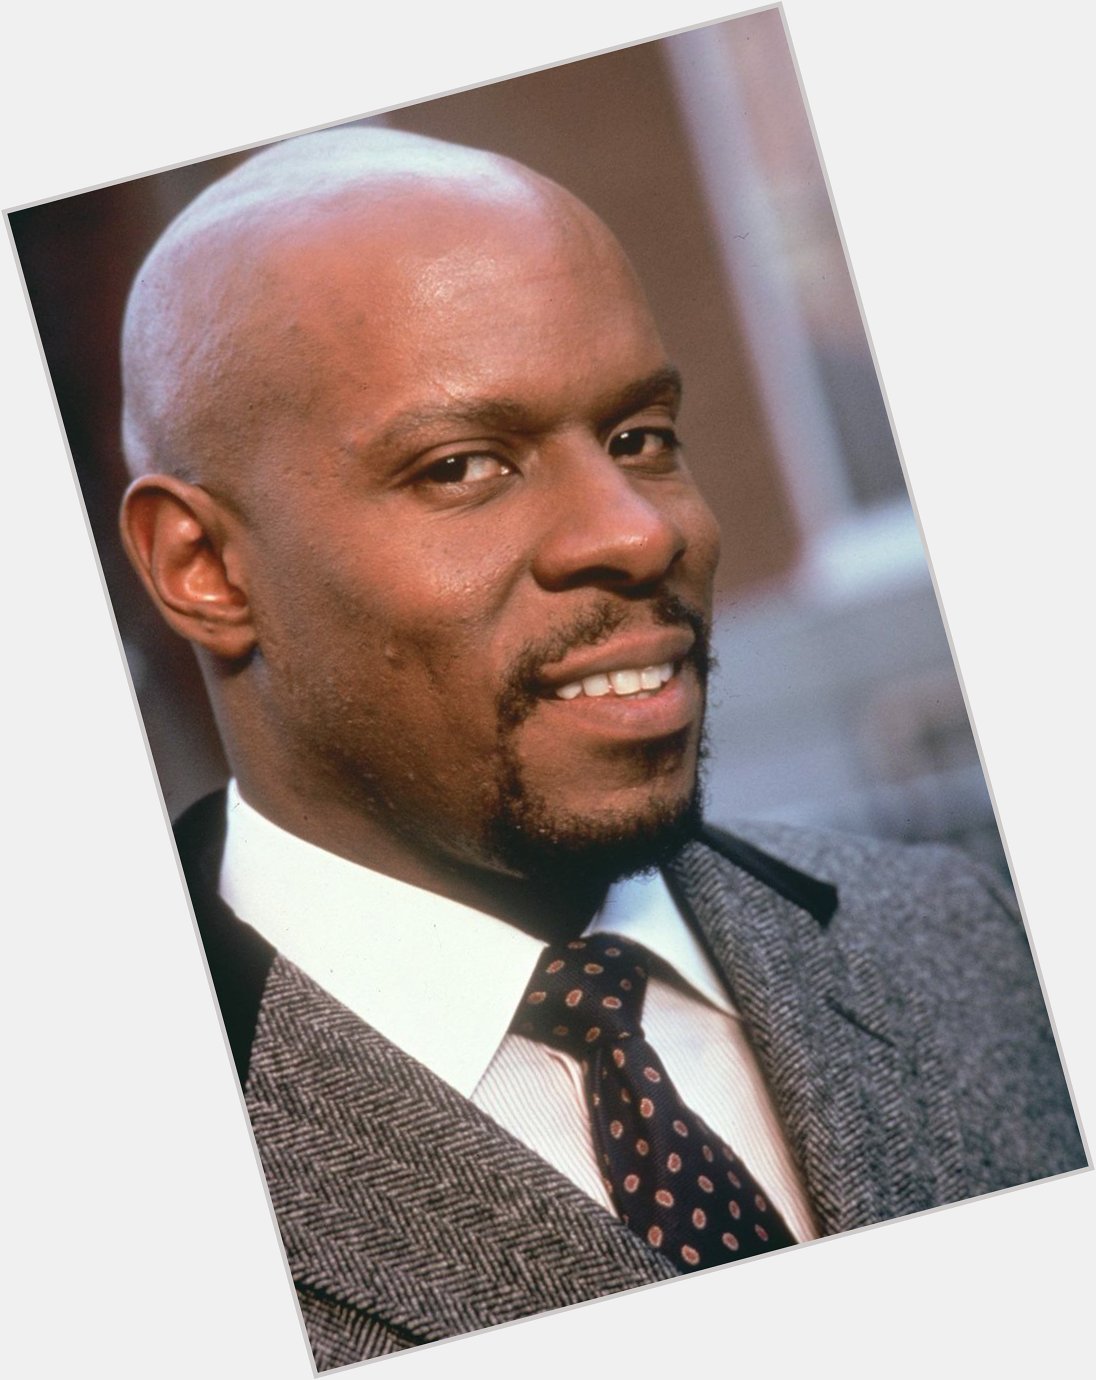  Wishing a very happy birthday to Avery Brooks A Man Called Hawk
Fixed it! 